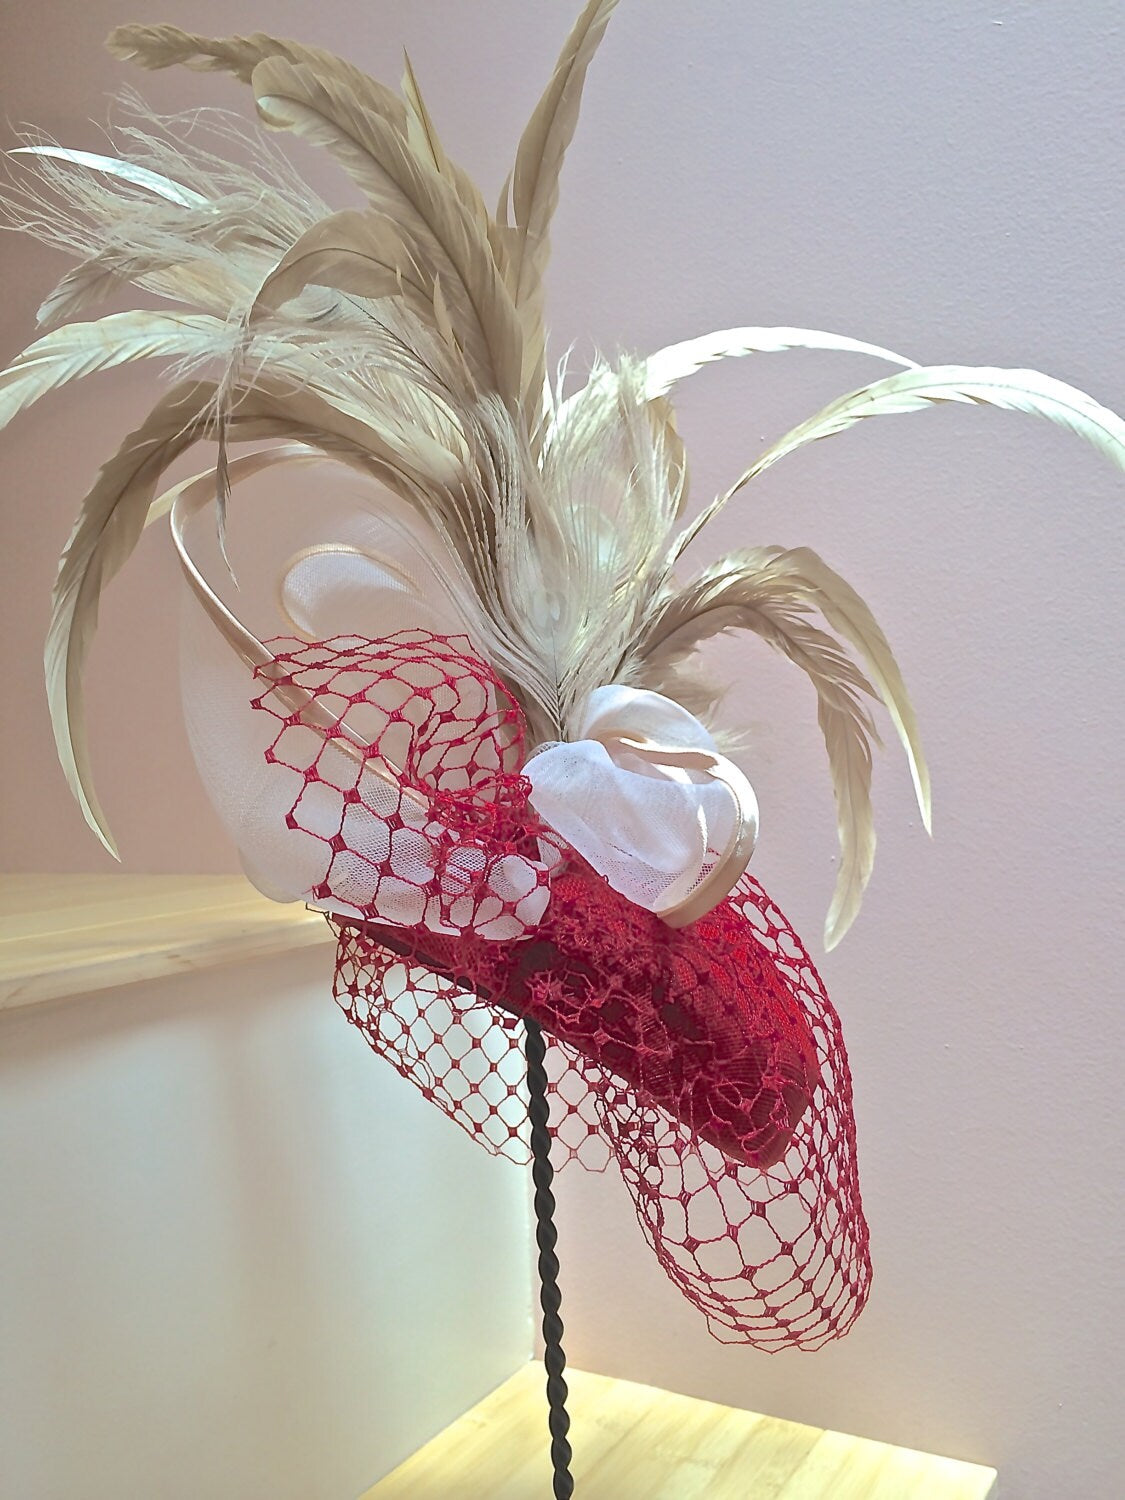 Red Sinamay hat with Feathers, Red Pill box hat, RED- Crinoline and Red Vintage Veiling, Church hat in Red, Mother of the Bride in Red.